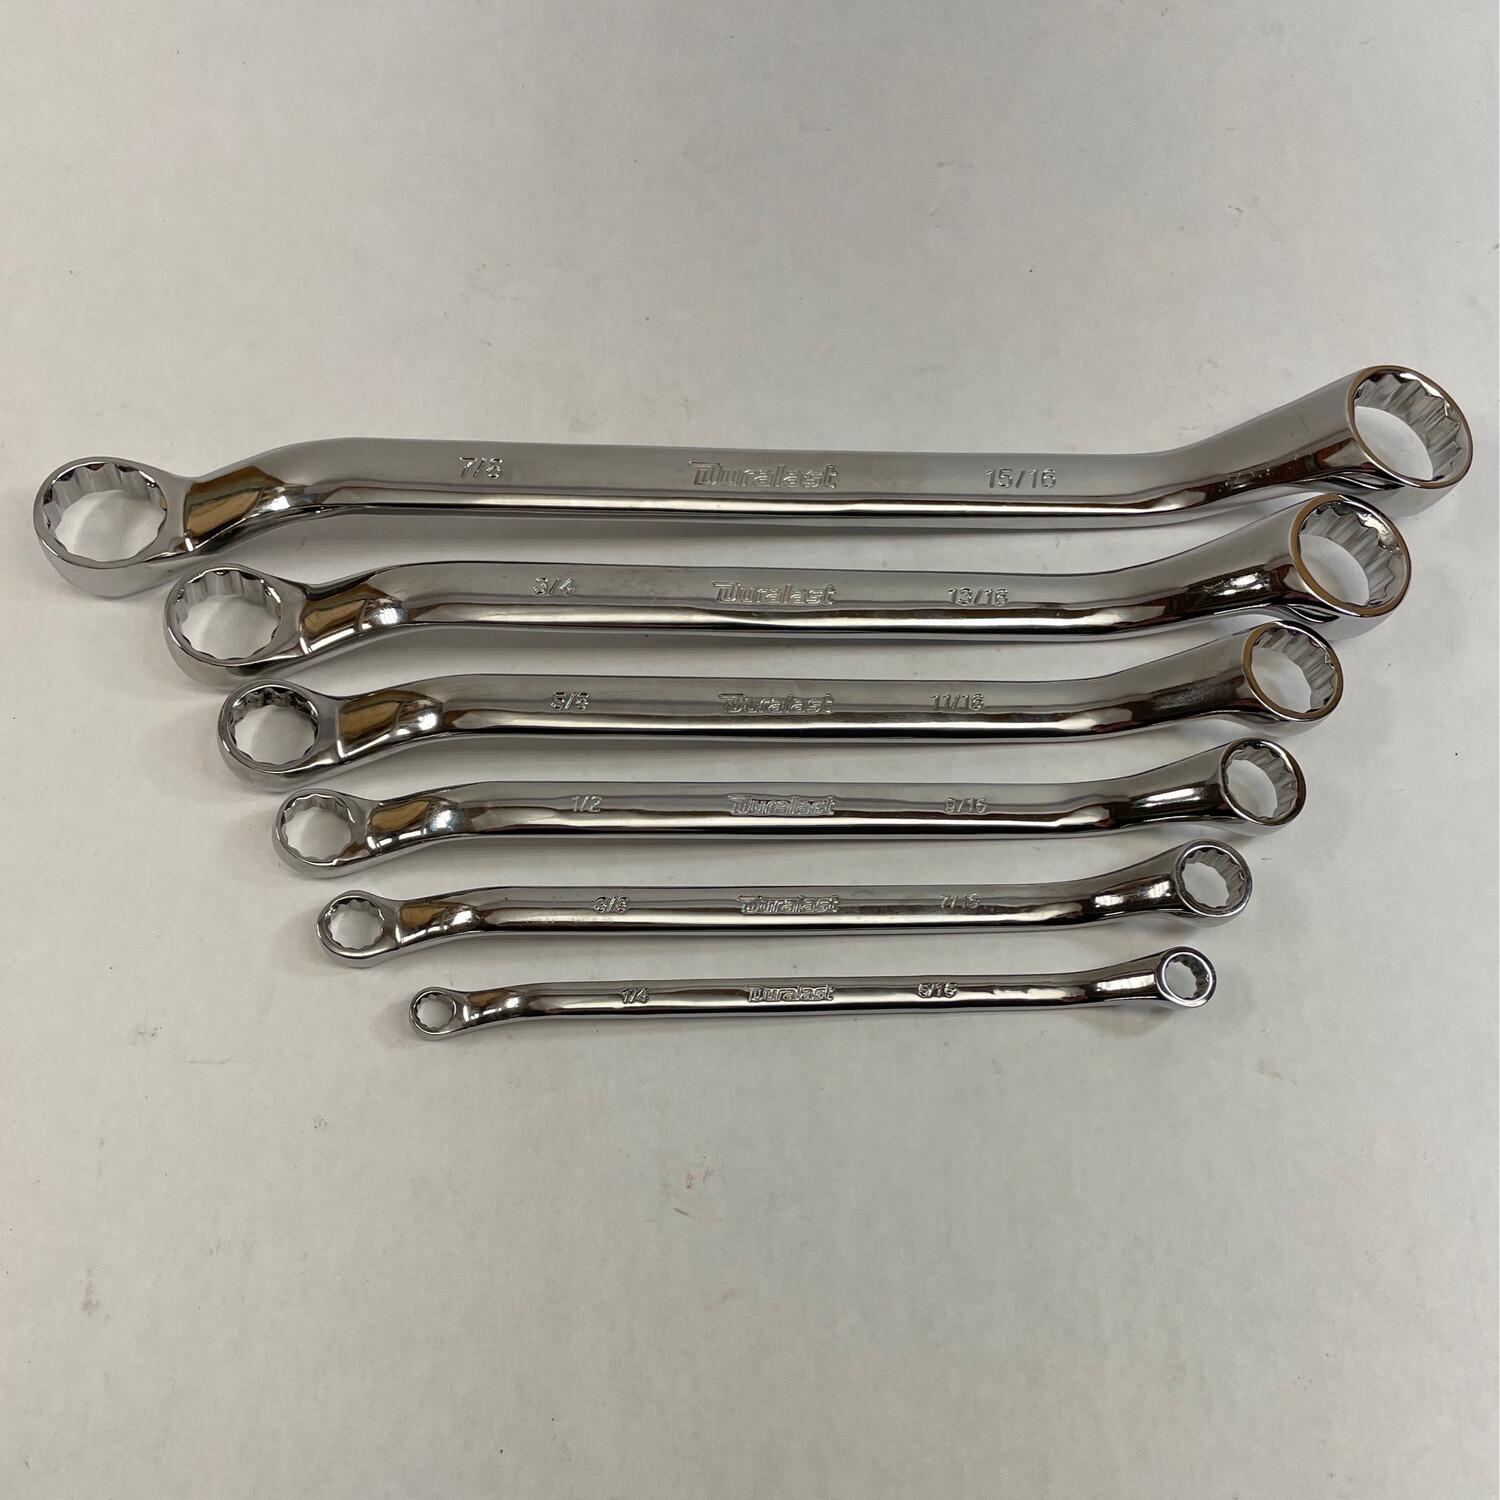 Duralast 6 Pc. SAE Double Box-End Wrench Set (1/4”- 15/16”)